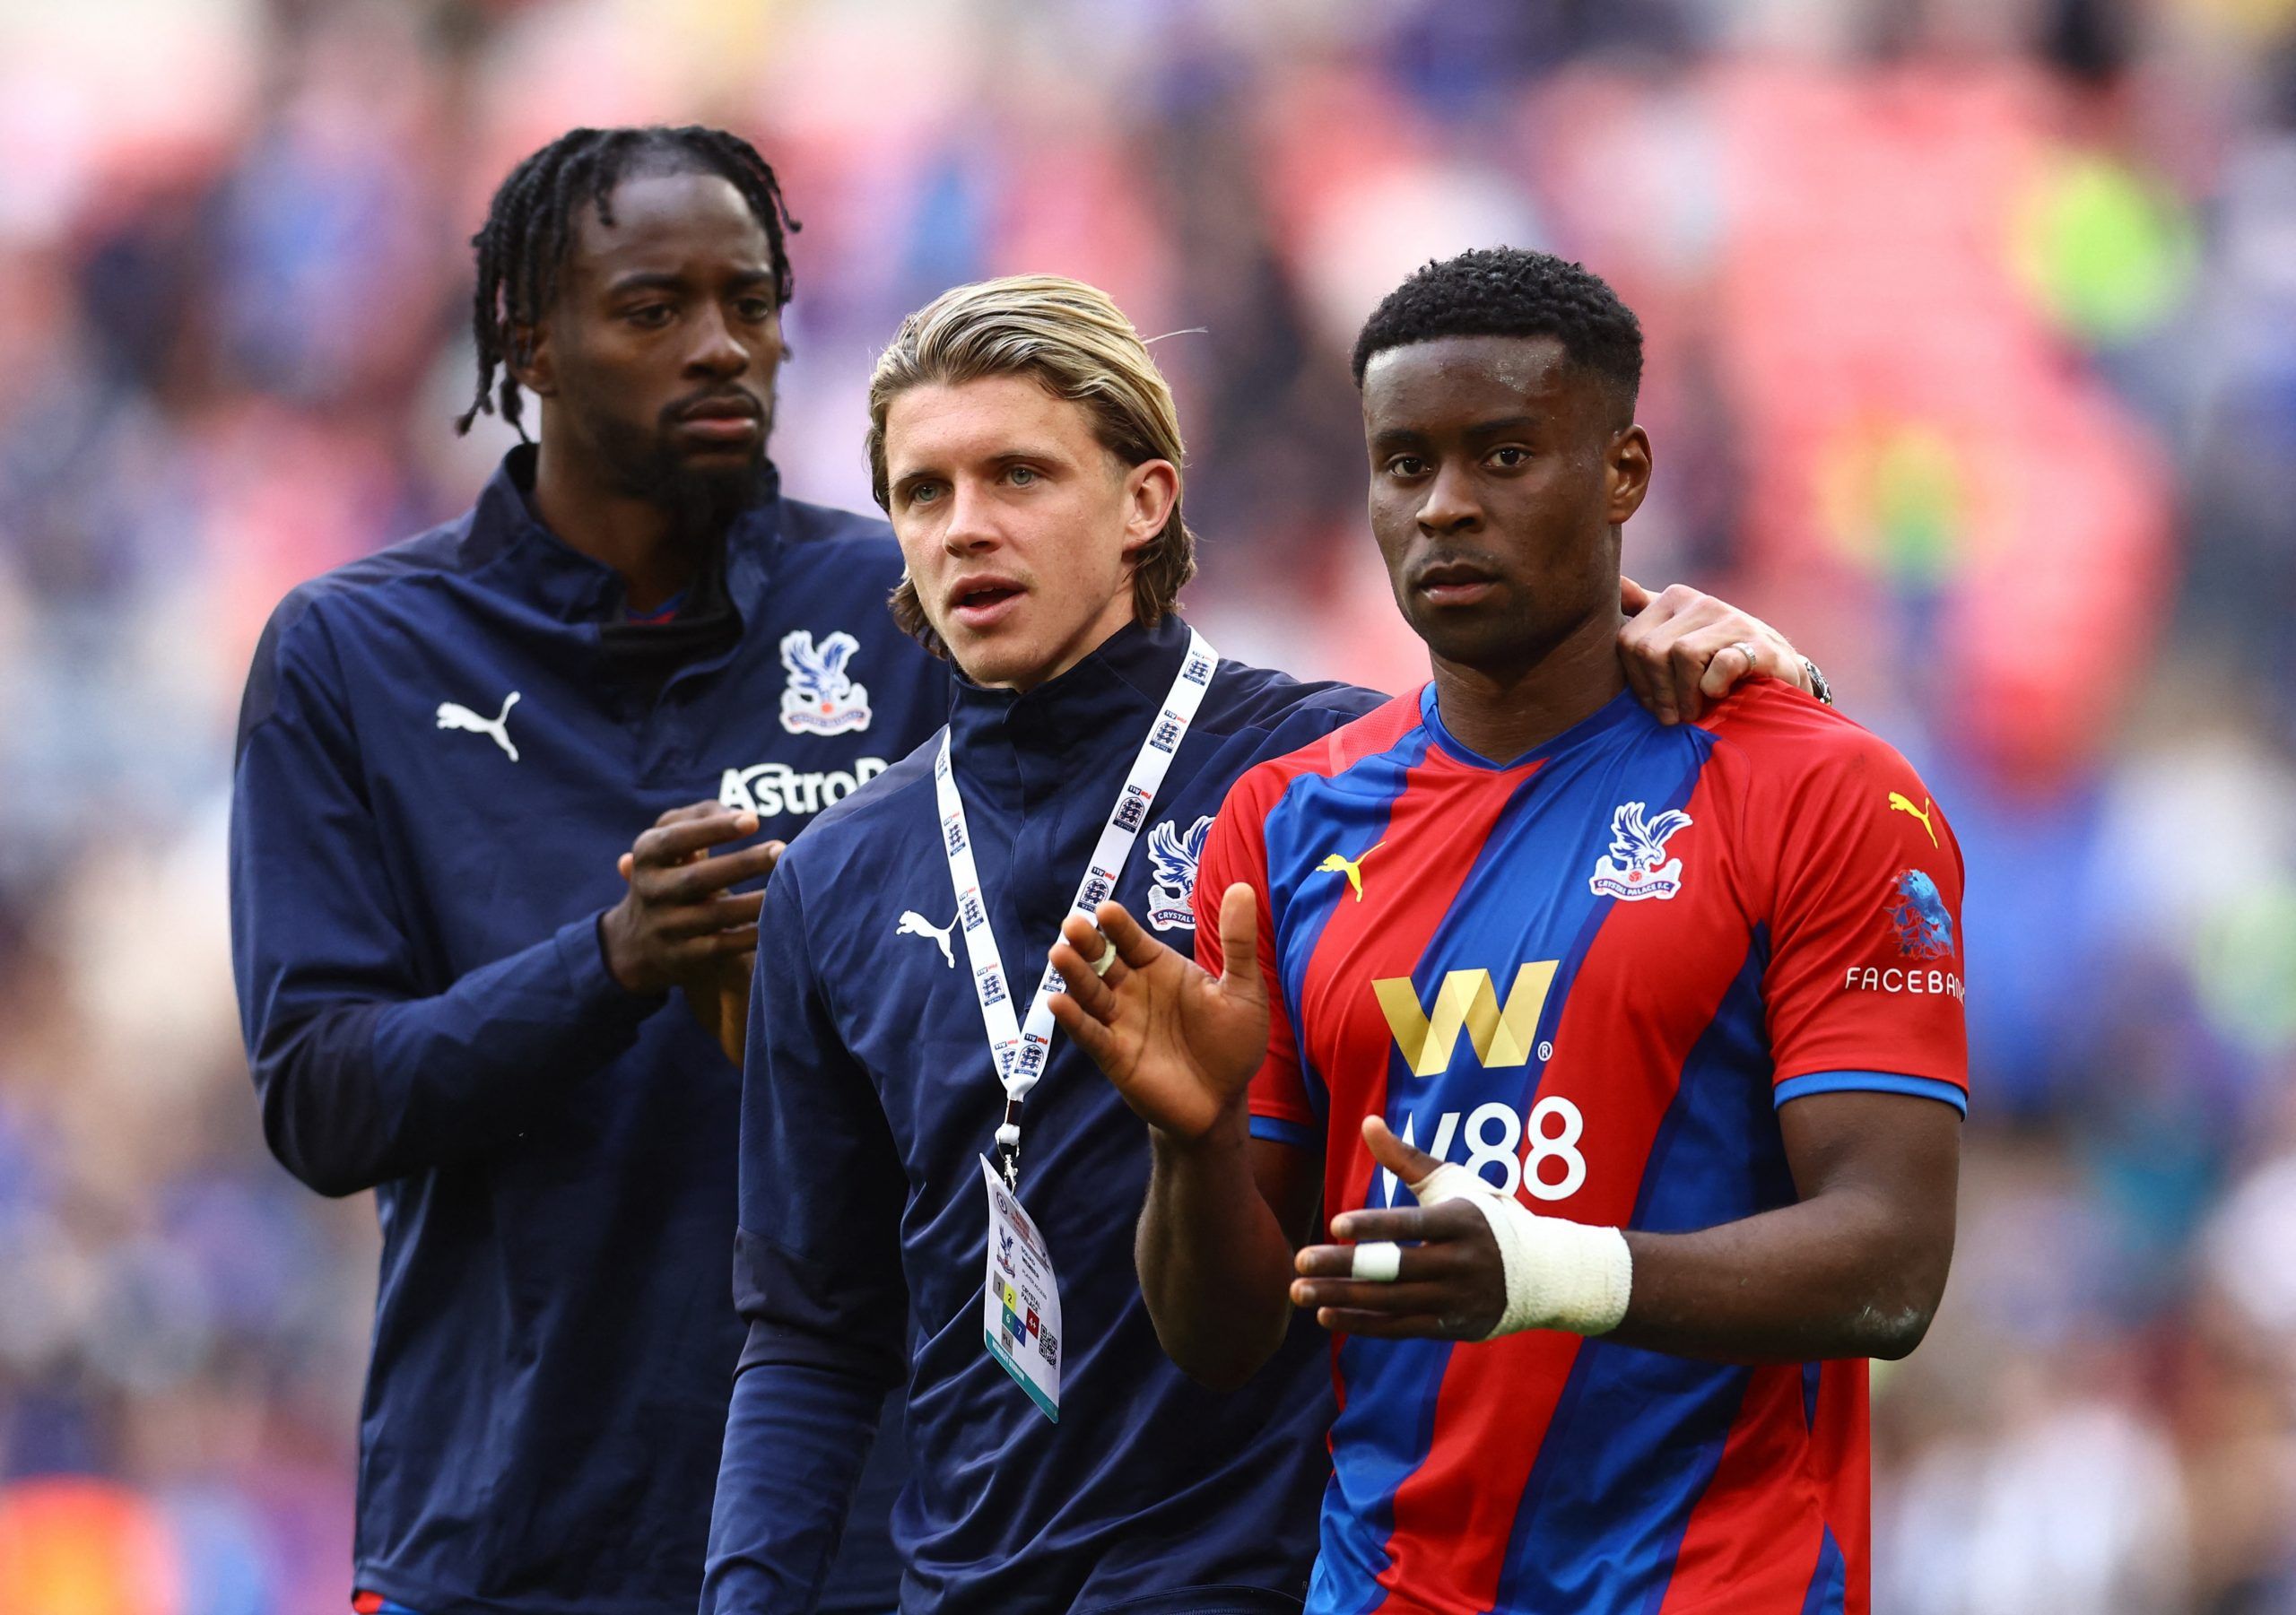 Soccer Football - FA Cup Semi Final - Chelsea v Crystal Palace - Wembley Stadium, London, Britain - April 17, 2022 Crystal Palace's Marc Guehi, Conor Gallagher and Jean-Philippe Mateta after the match REUTERS/David Klein